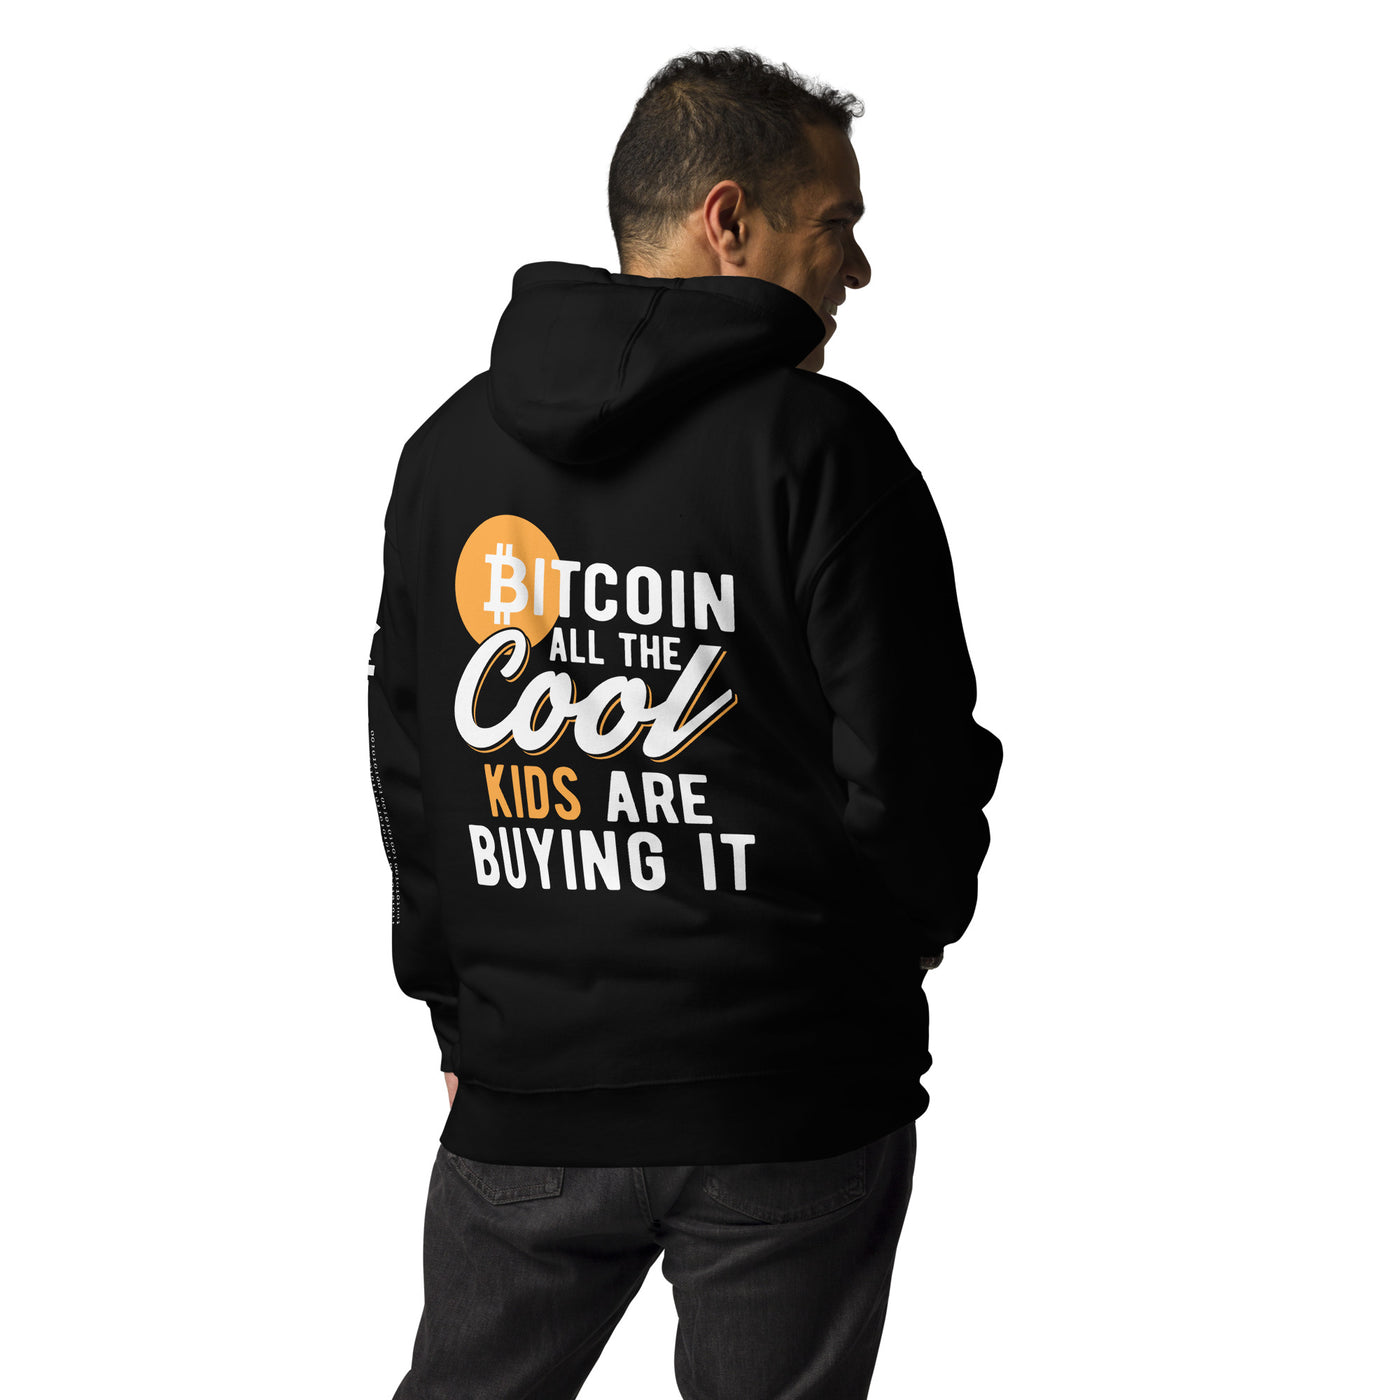 Bitcoin all the cool kids are buying it Unisex Hoodie